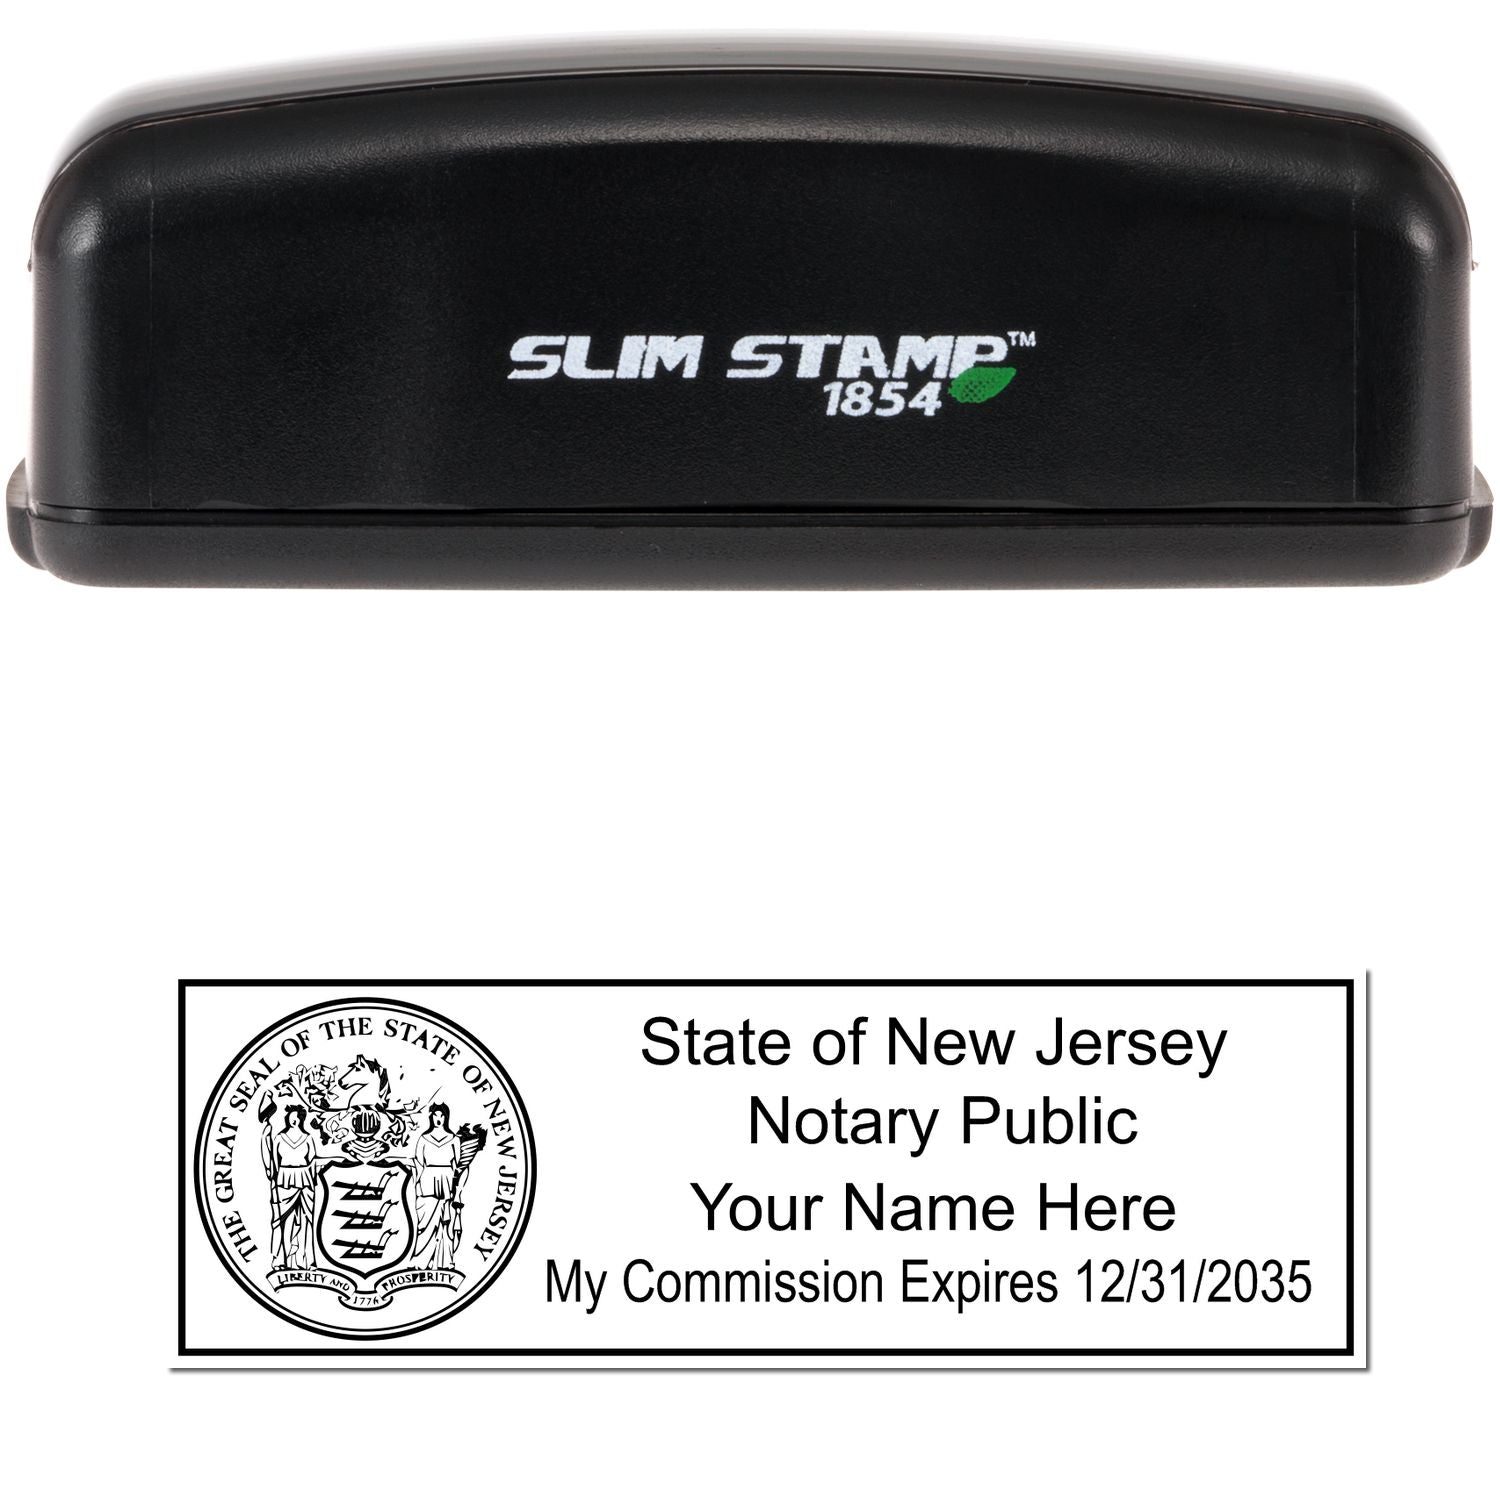 The main image for the Slim Pre-Inked State Seal Notary Stamp for New Jersey depicting a sample of the imprint and electronic files